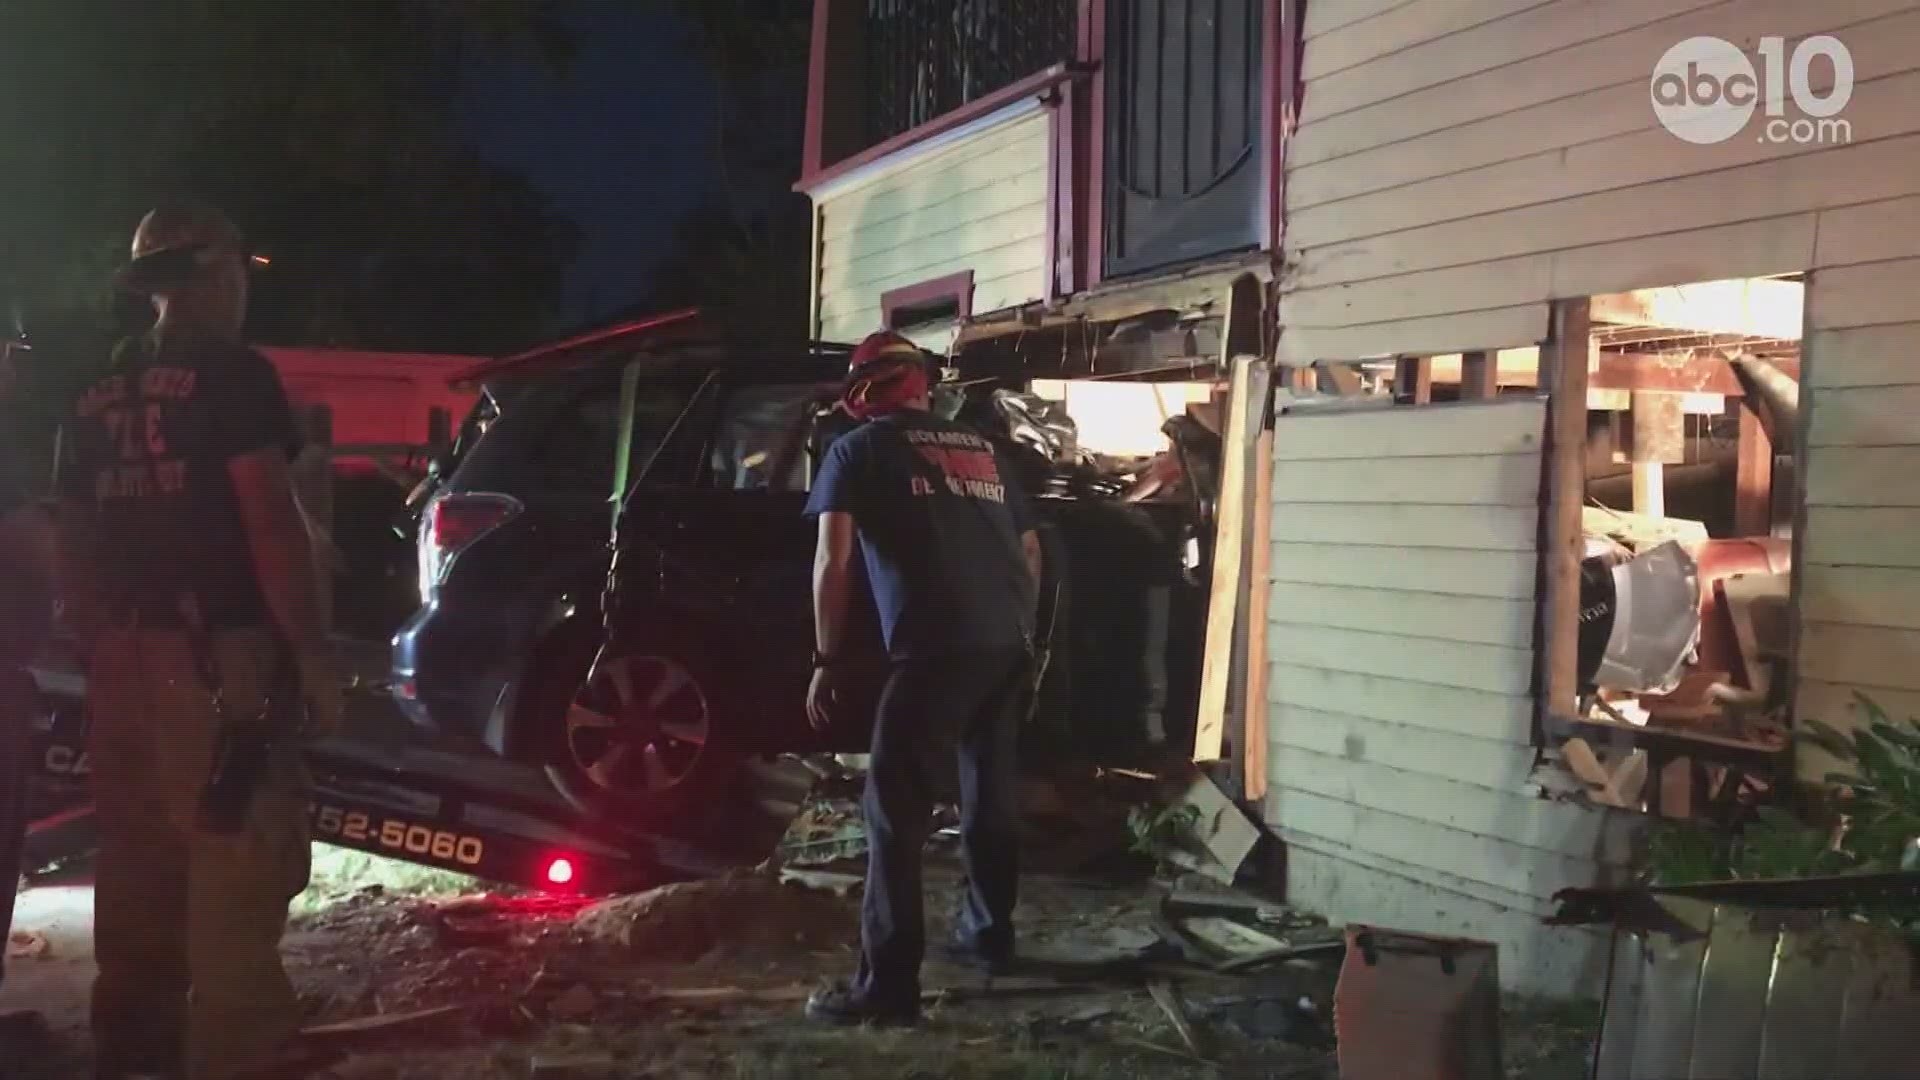 Crews with the Sacramento Fire Department were called out to the home located near the intersection of Broadway and Santa Cruz Way. When they arrived, firefighters found the tail end of a blue Subaru Forester poking out from the side of the house, the other half inside the bottom floor.